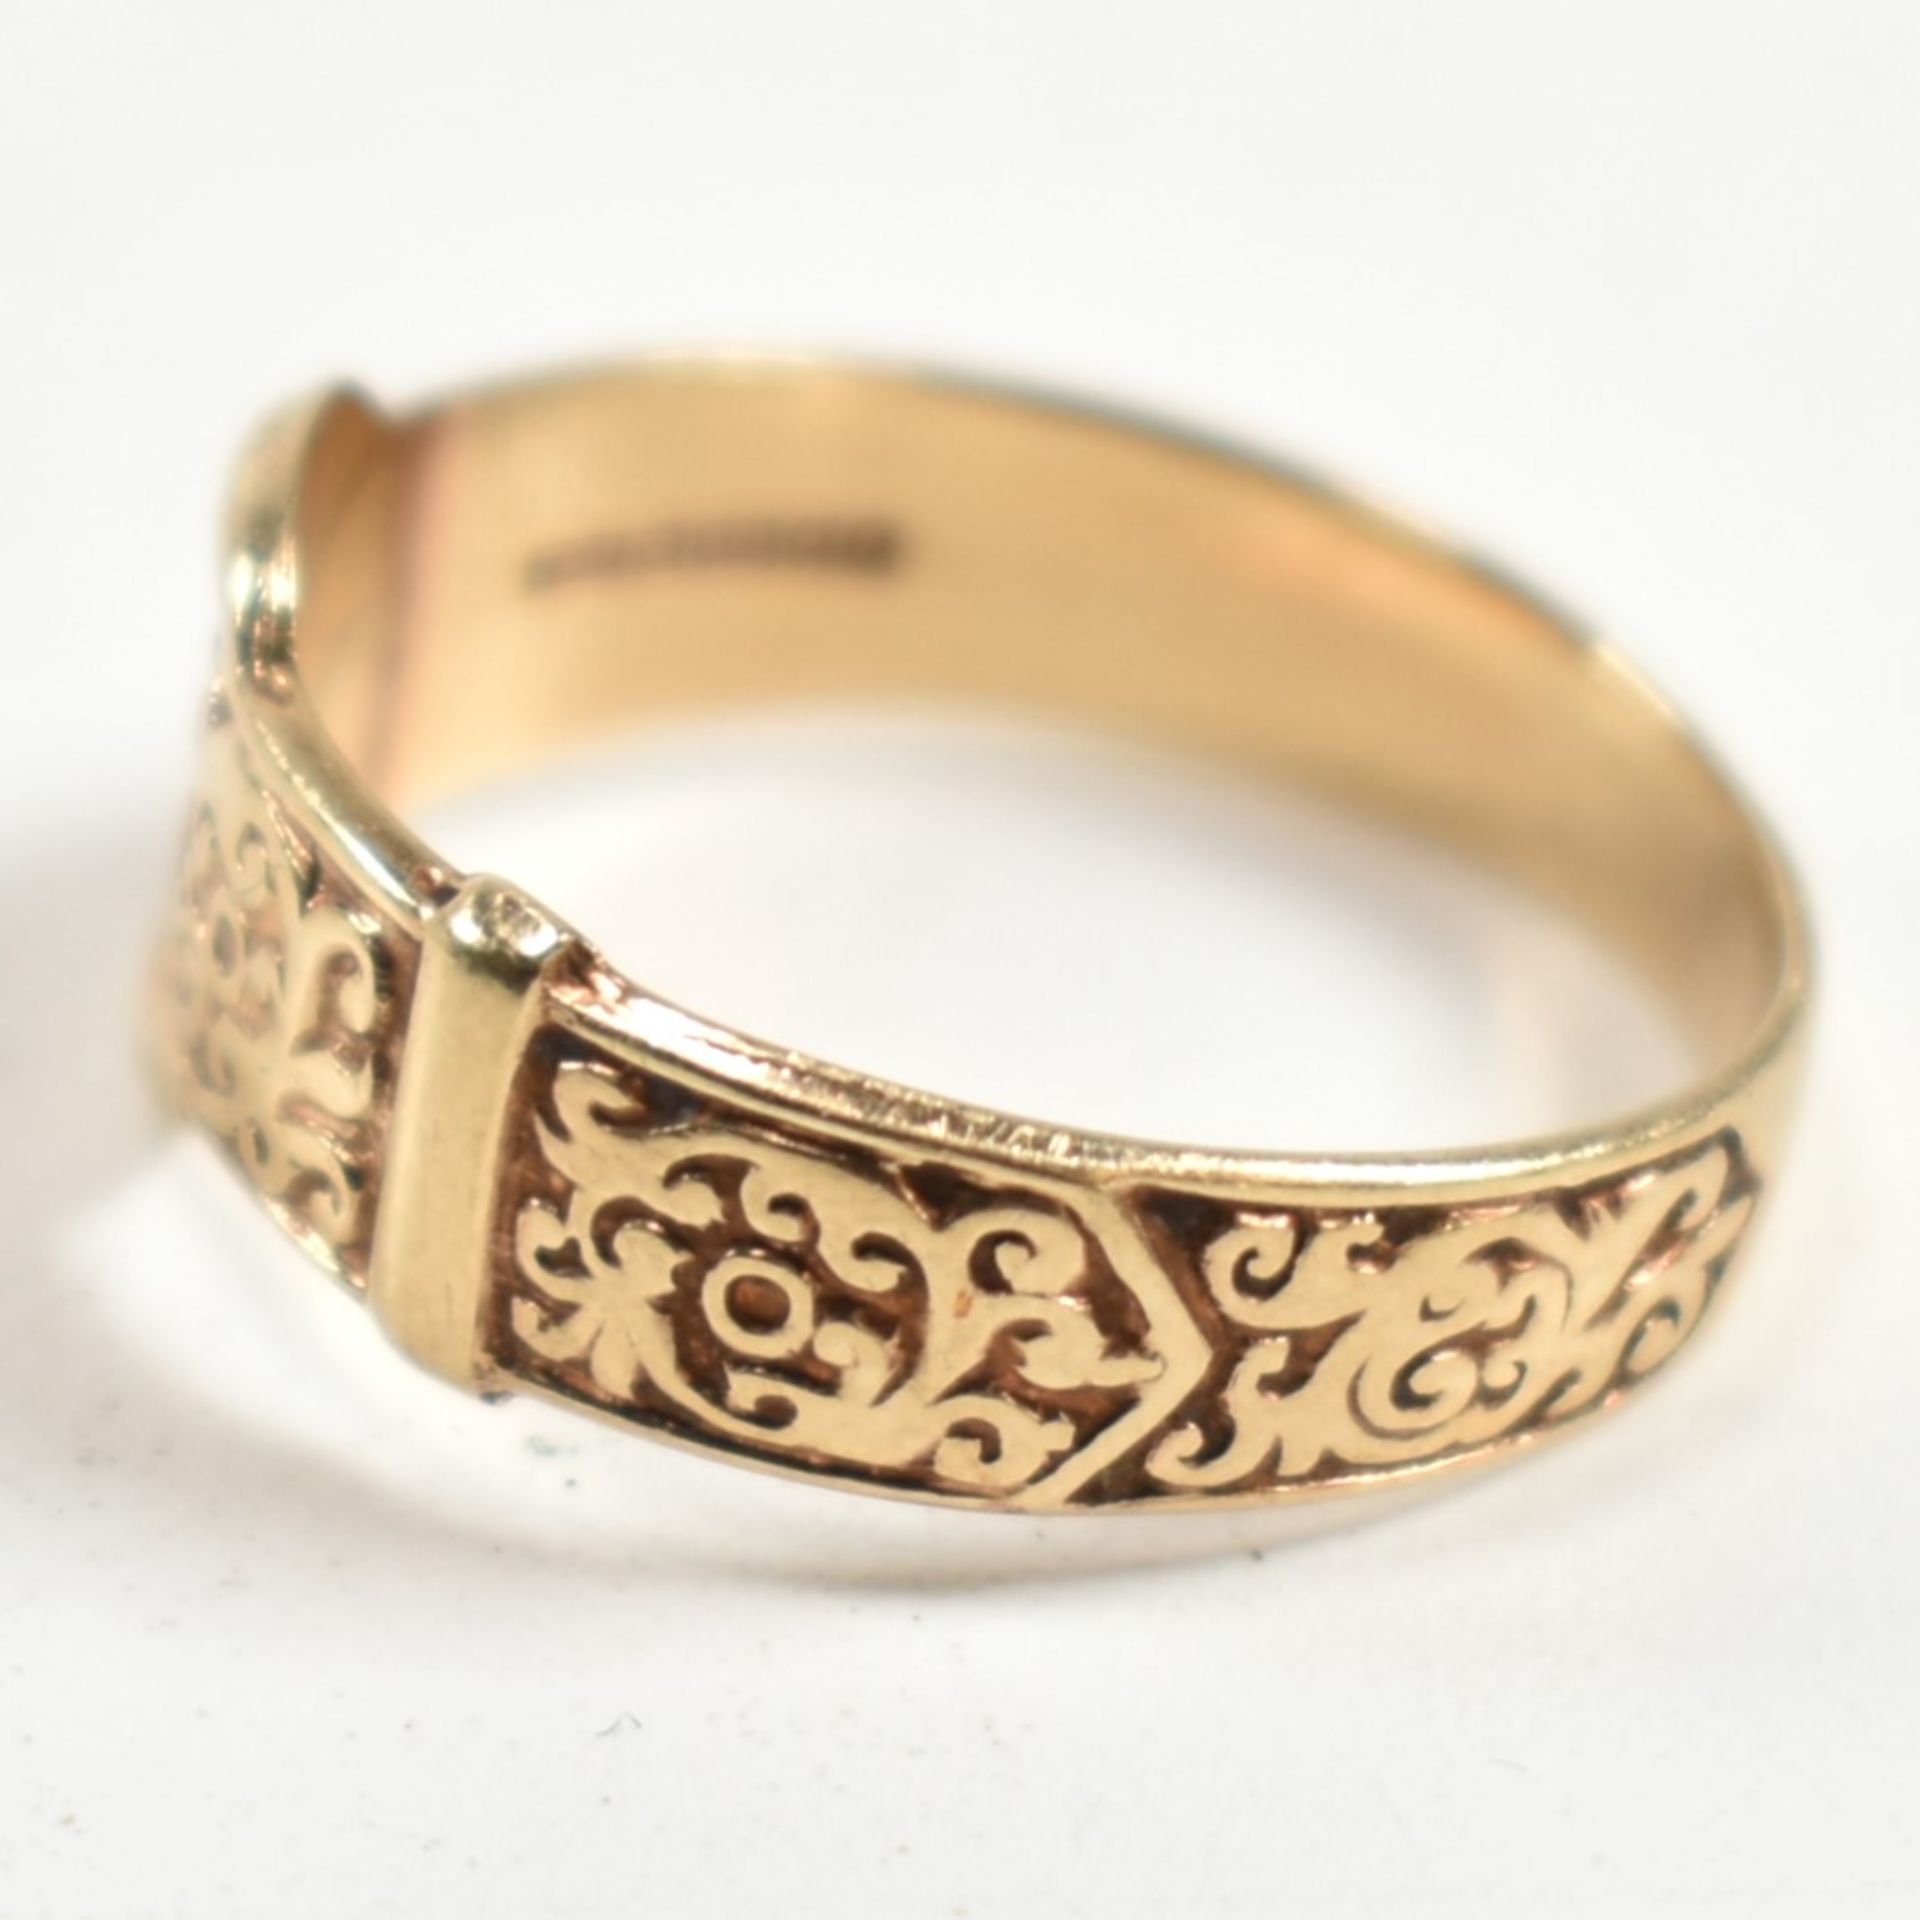 HALLMARKED 9CT GOLD ENGRAVED BELT BUCKLE RING - Image 5 of 9